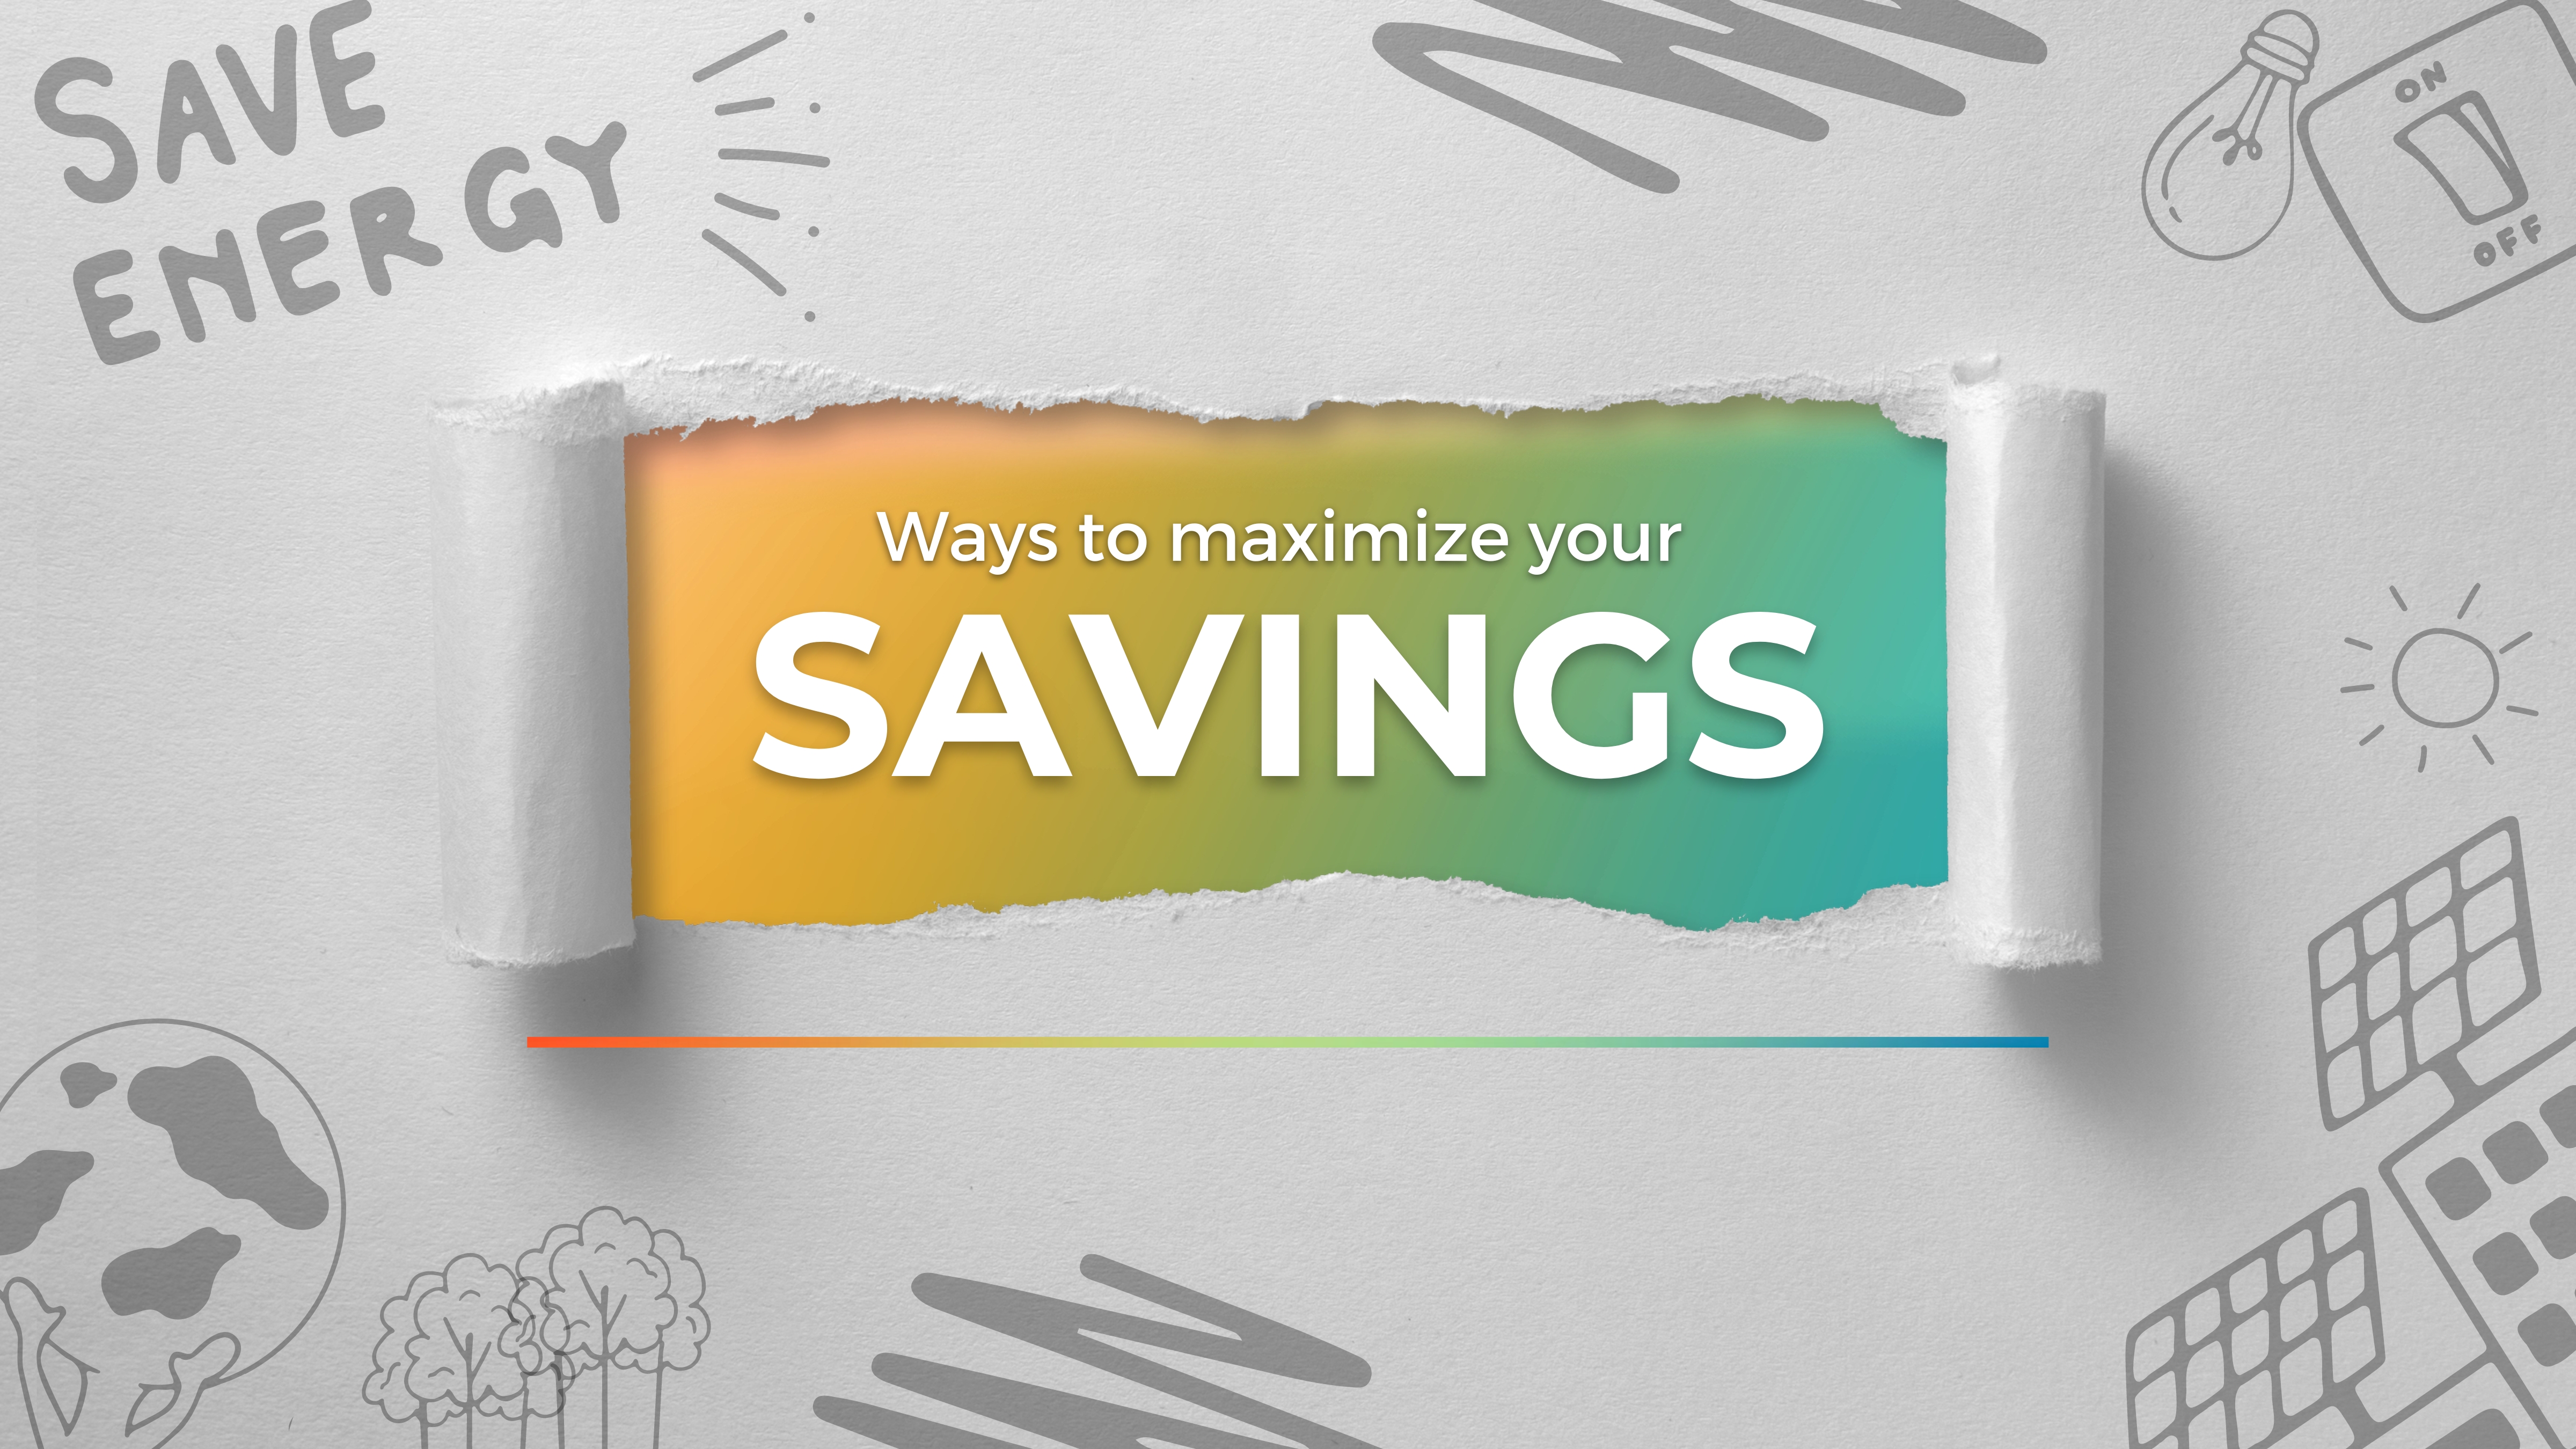 Ways to maximize savings on your electricity bill!